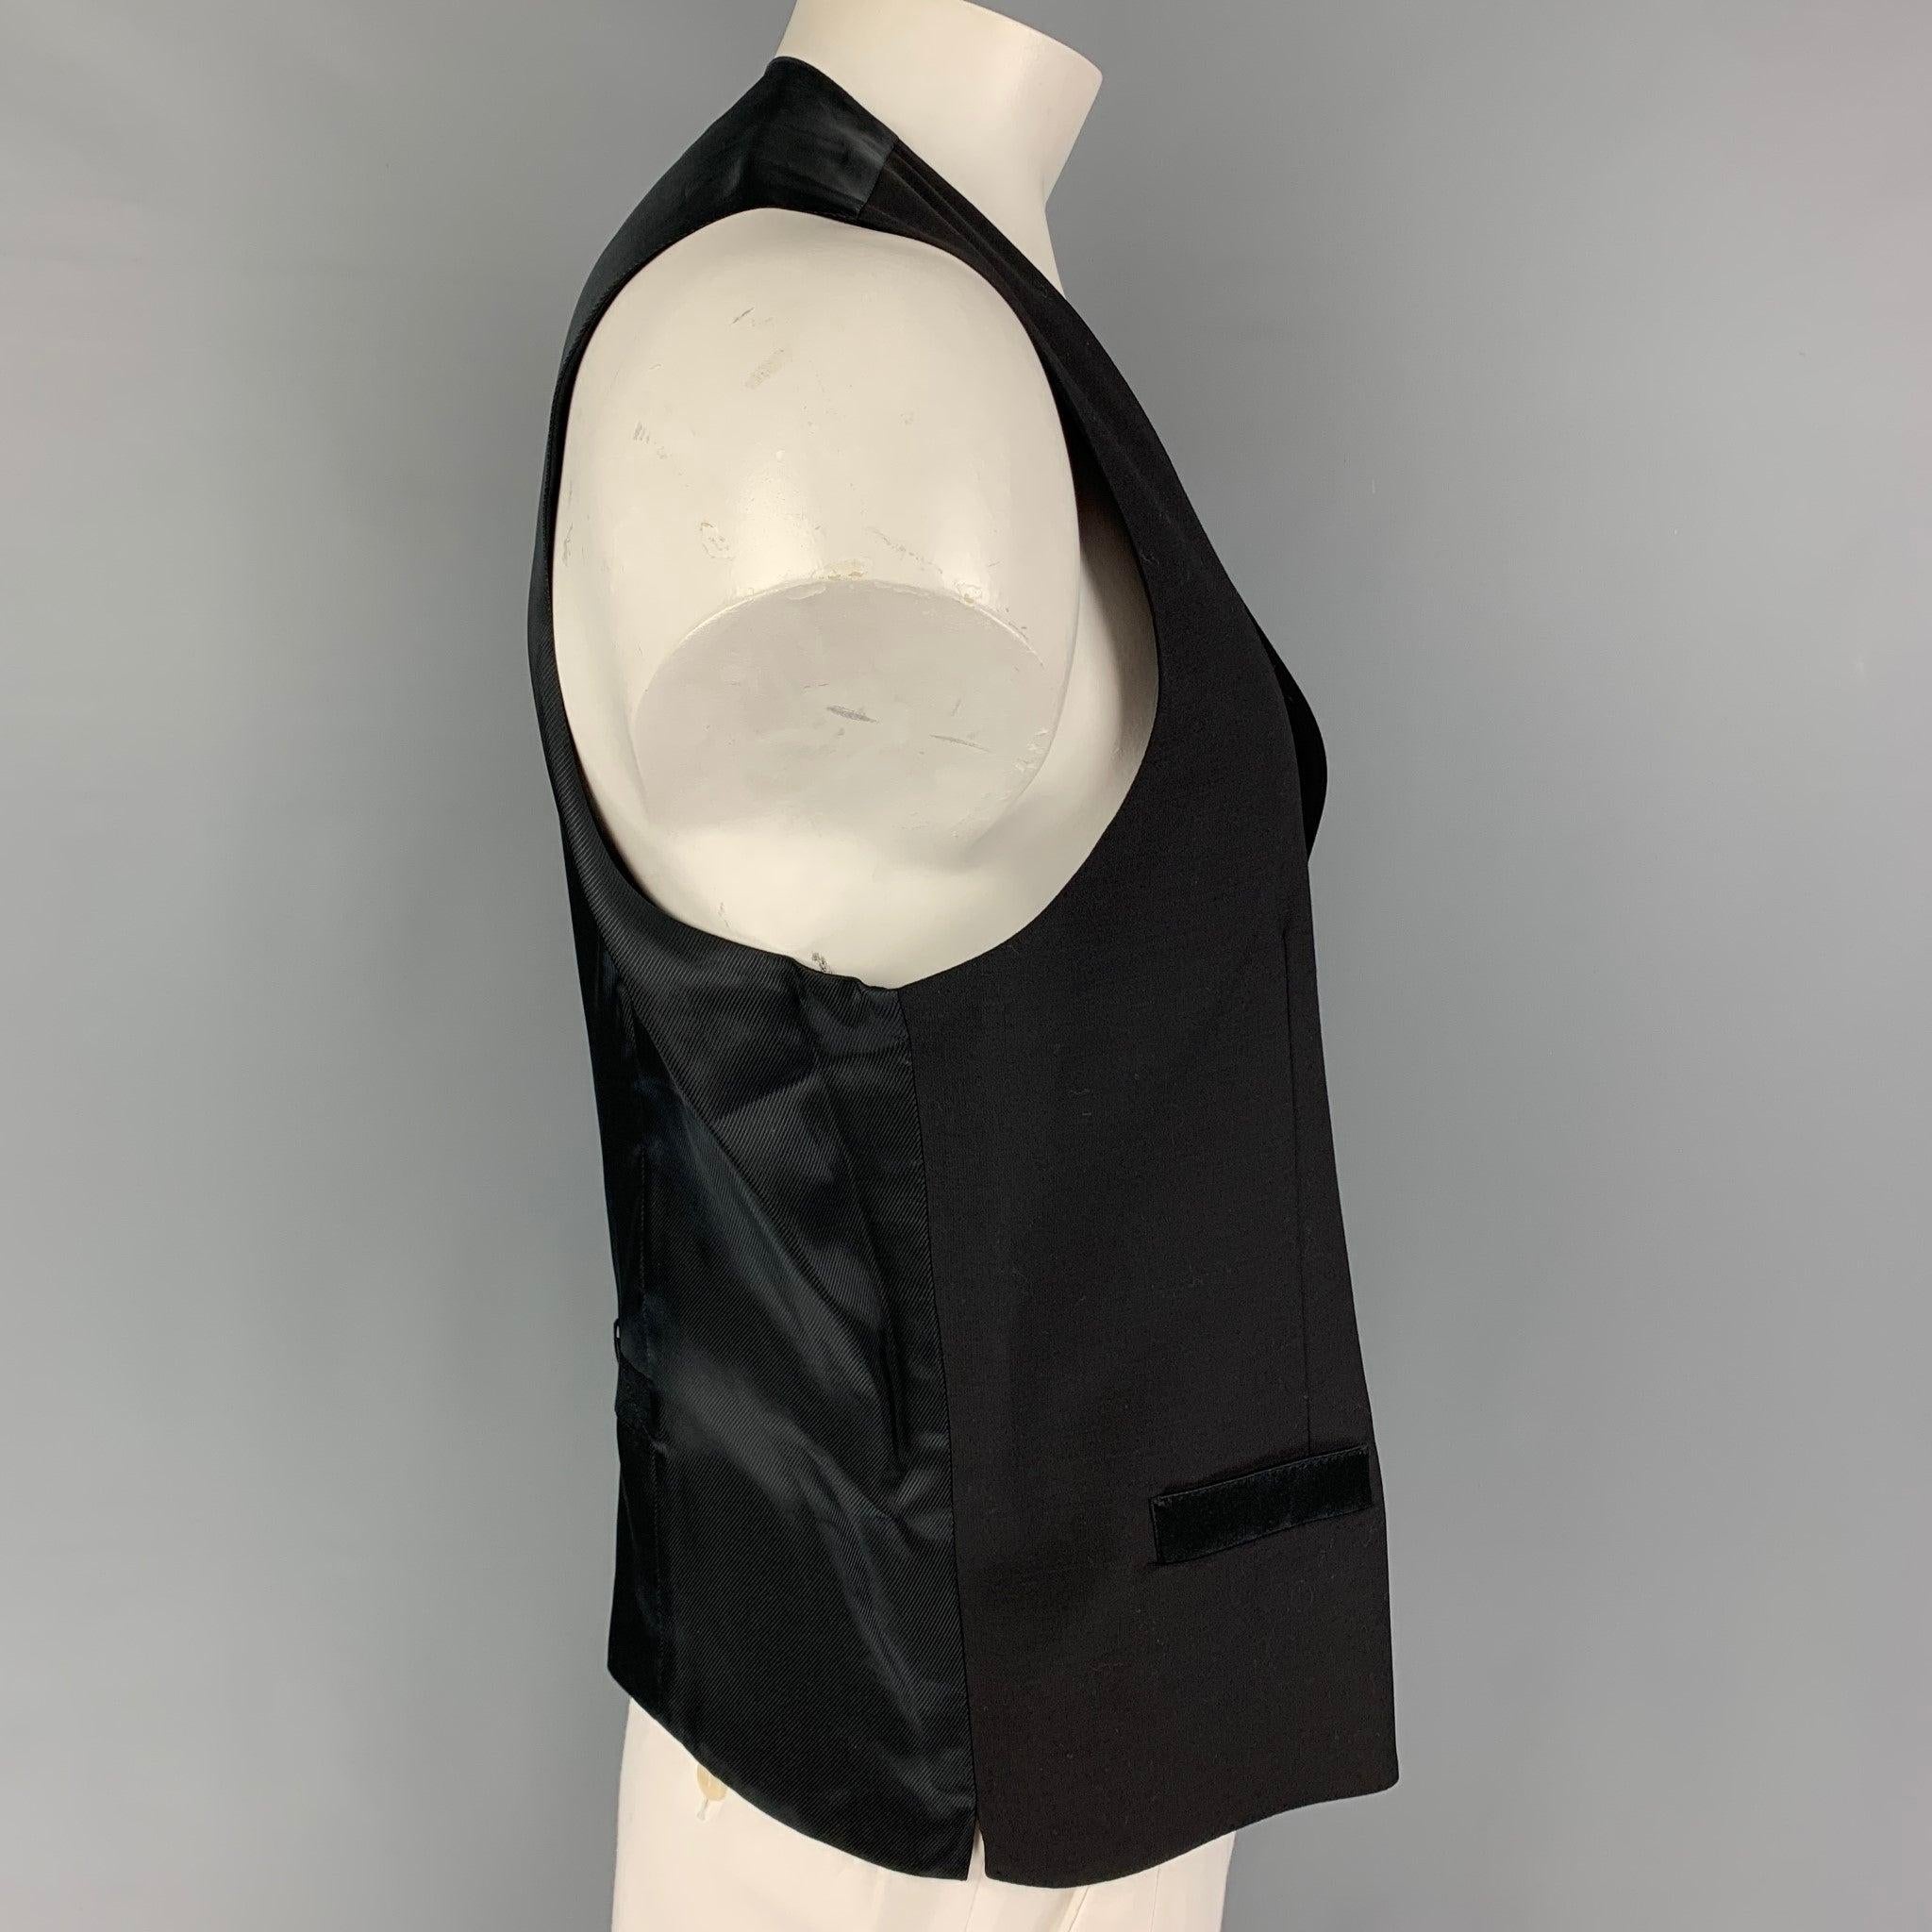 DOLCE & GABBANA vest comes in a black wool / silk featuring a back belt, slit pockets, and a buttoned closure. Made in Italy.
Very Good
Pre-Owned Condition. 

Marked:   56 

Measurements: 
 
Shoulder: 16 inches  Chest: 46 inches  Length: 25 inches